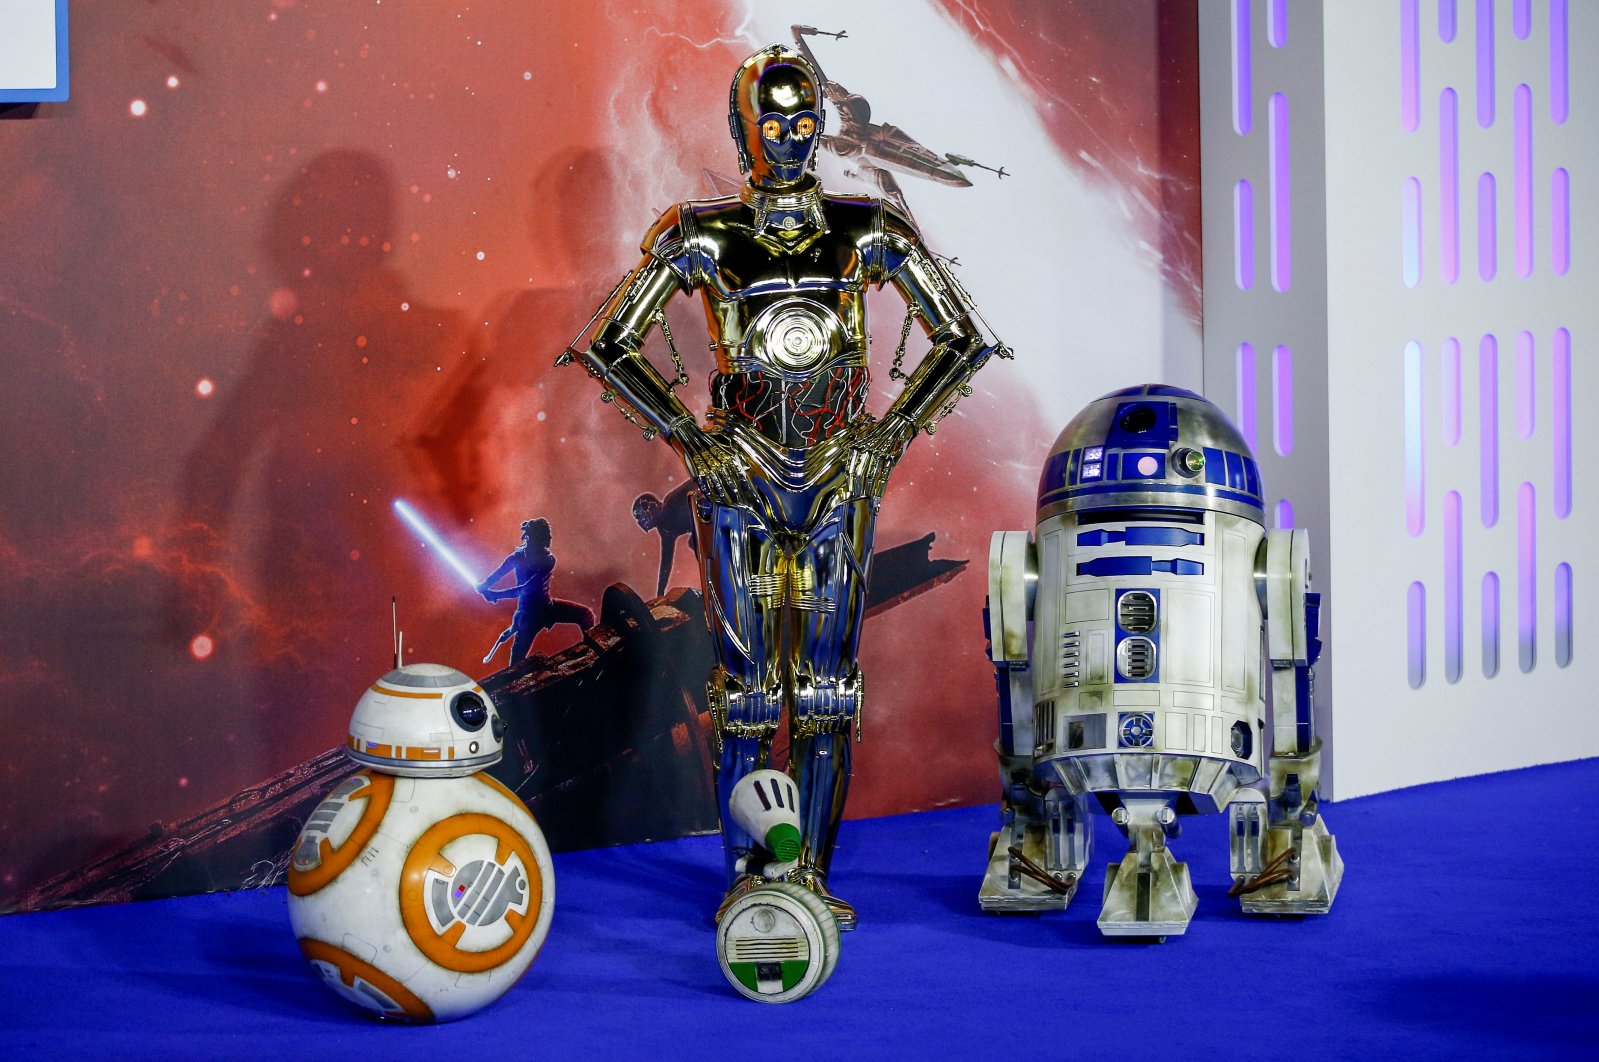 Star Wars robots R2-D2 and BB8 and droids C3PO and D-O pose as they attend the premiere of "Star Wars: The Rise of Skywalker" in London, Britain, Dec. 18, 2019. (REUTERS)